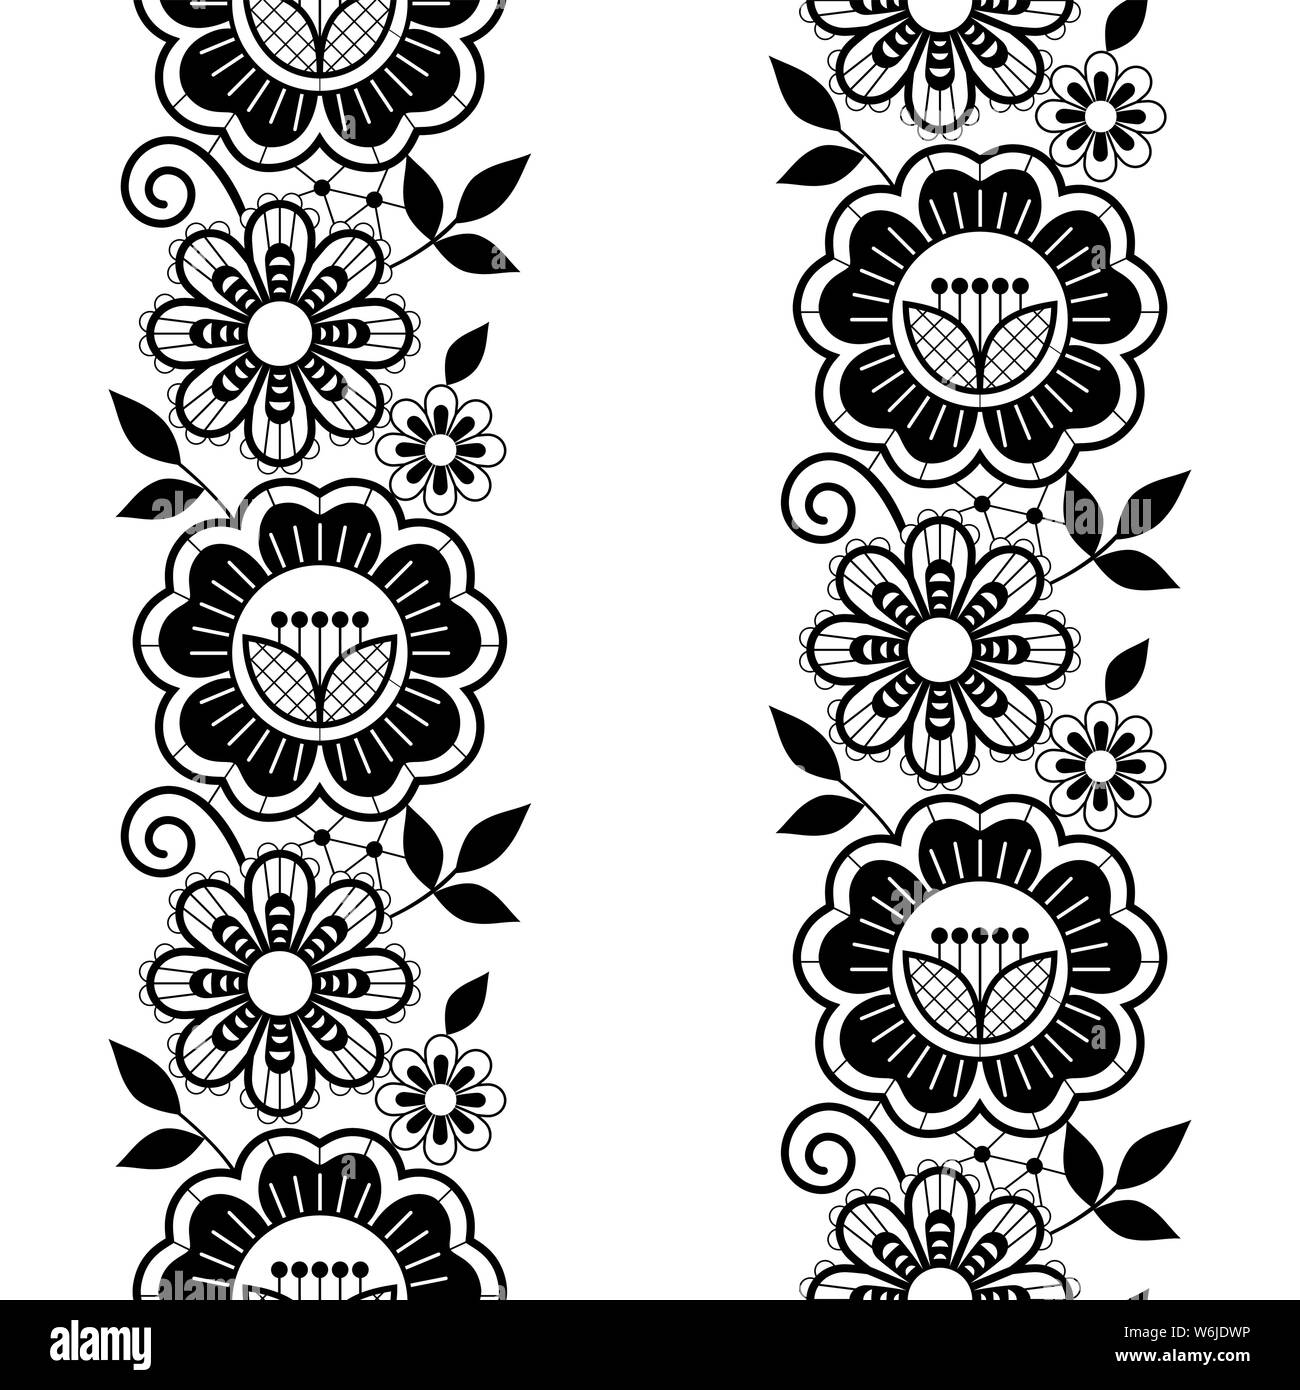 Seamless lace vertivcal long pattern set, monochrome horizontal design with roses, flowers and swirls, detailed Stock Vector